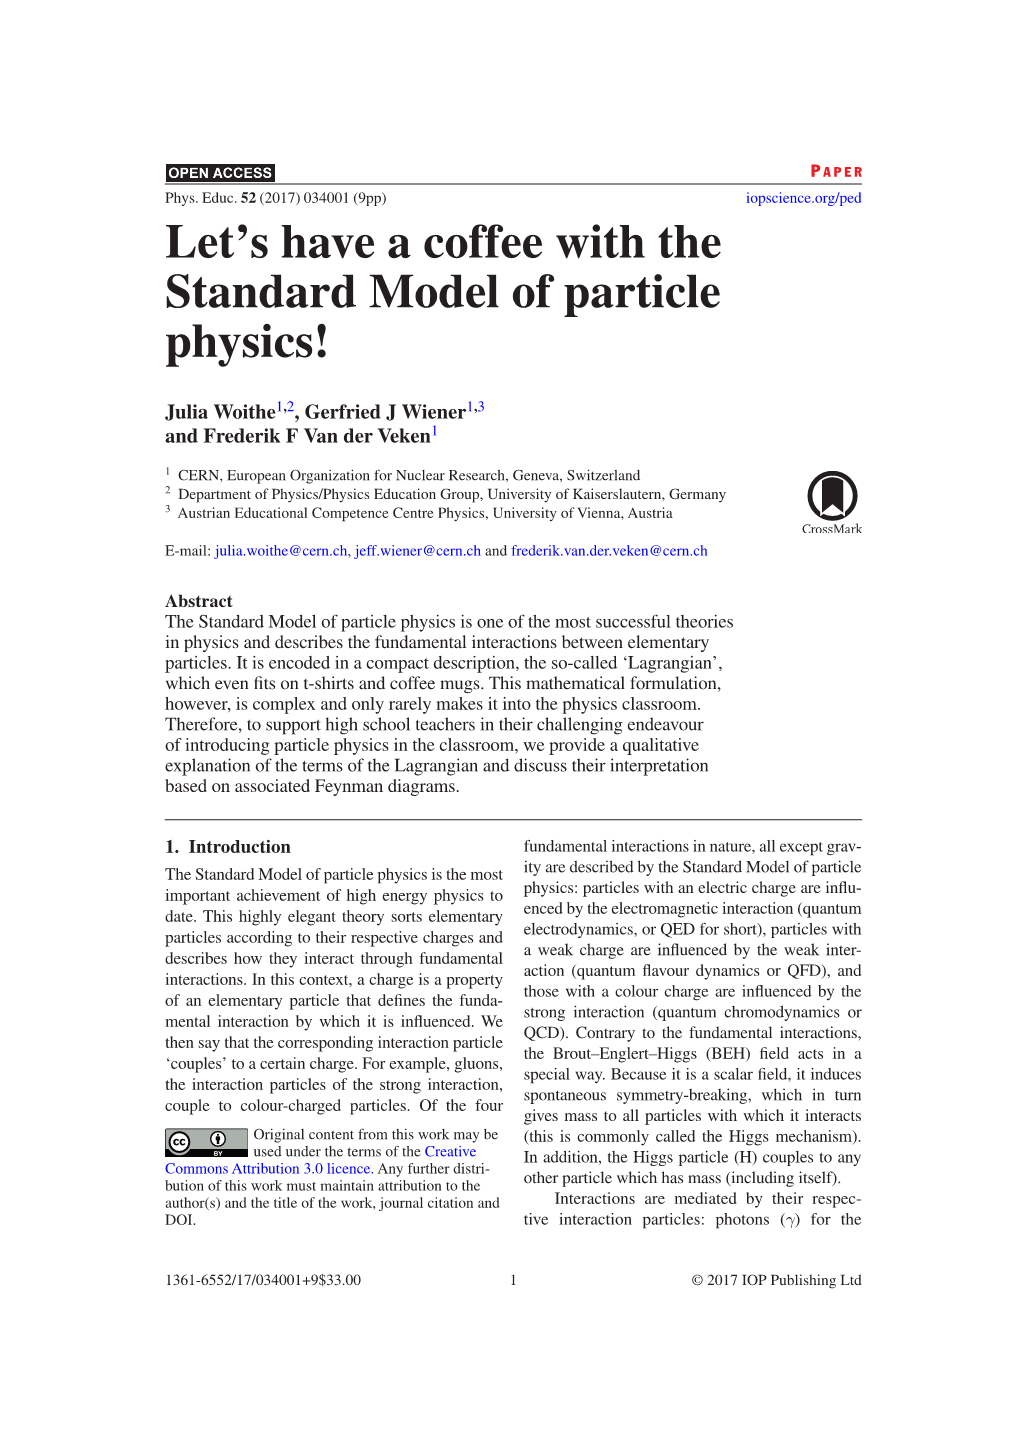 Let's Have a Coffee with the Standard Model of Particle